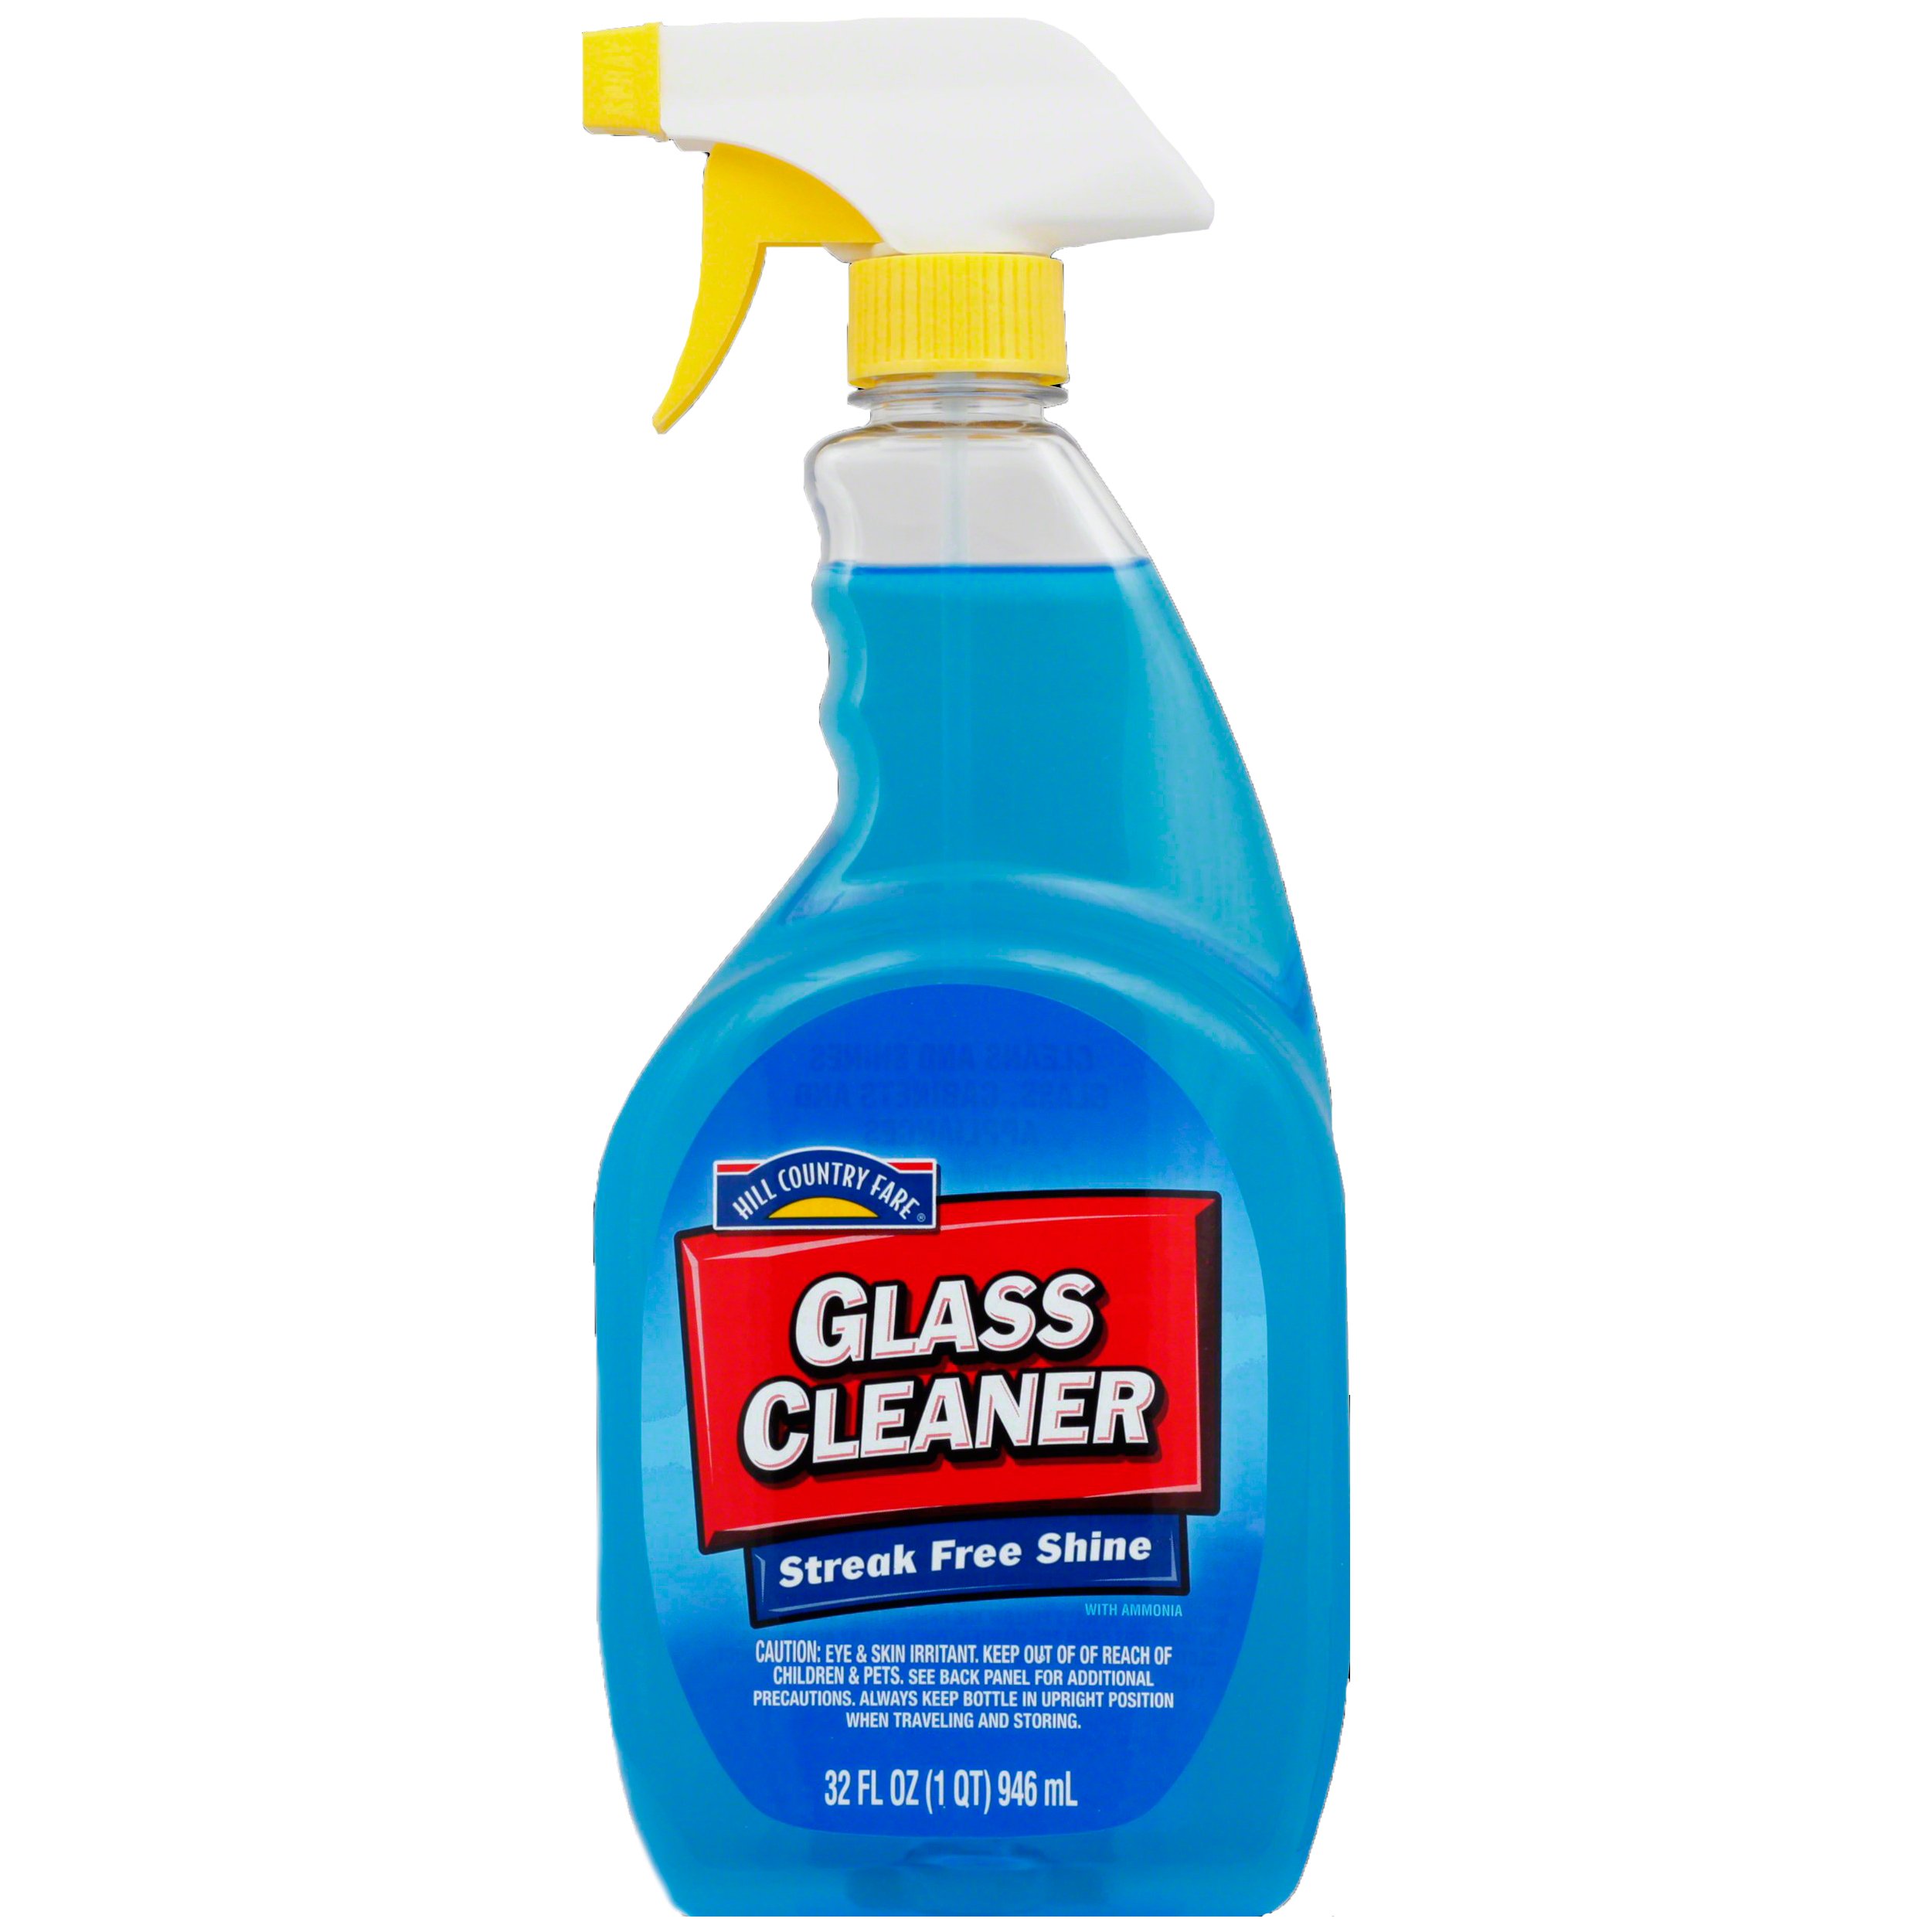 Sprayway Foaming Glass Cleaner Spray - Shop All Purpose Cleaners at H-E-B